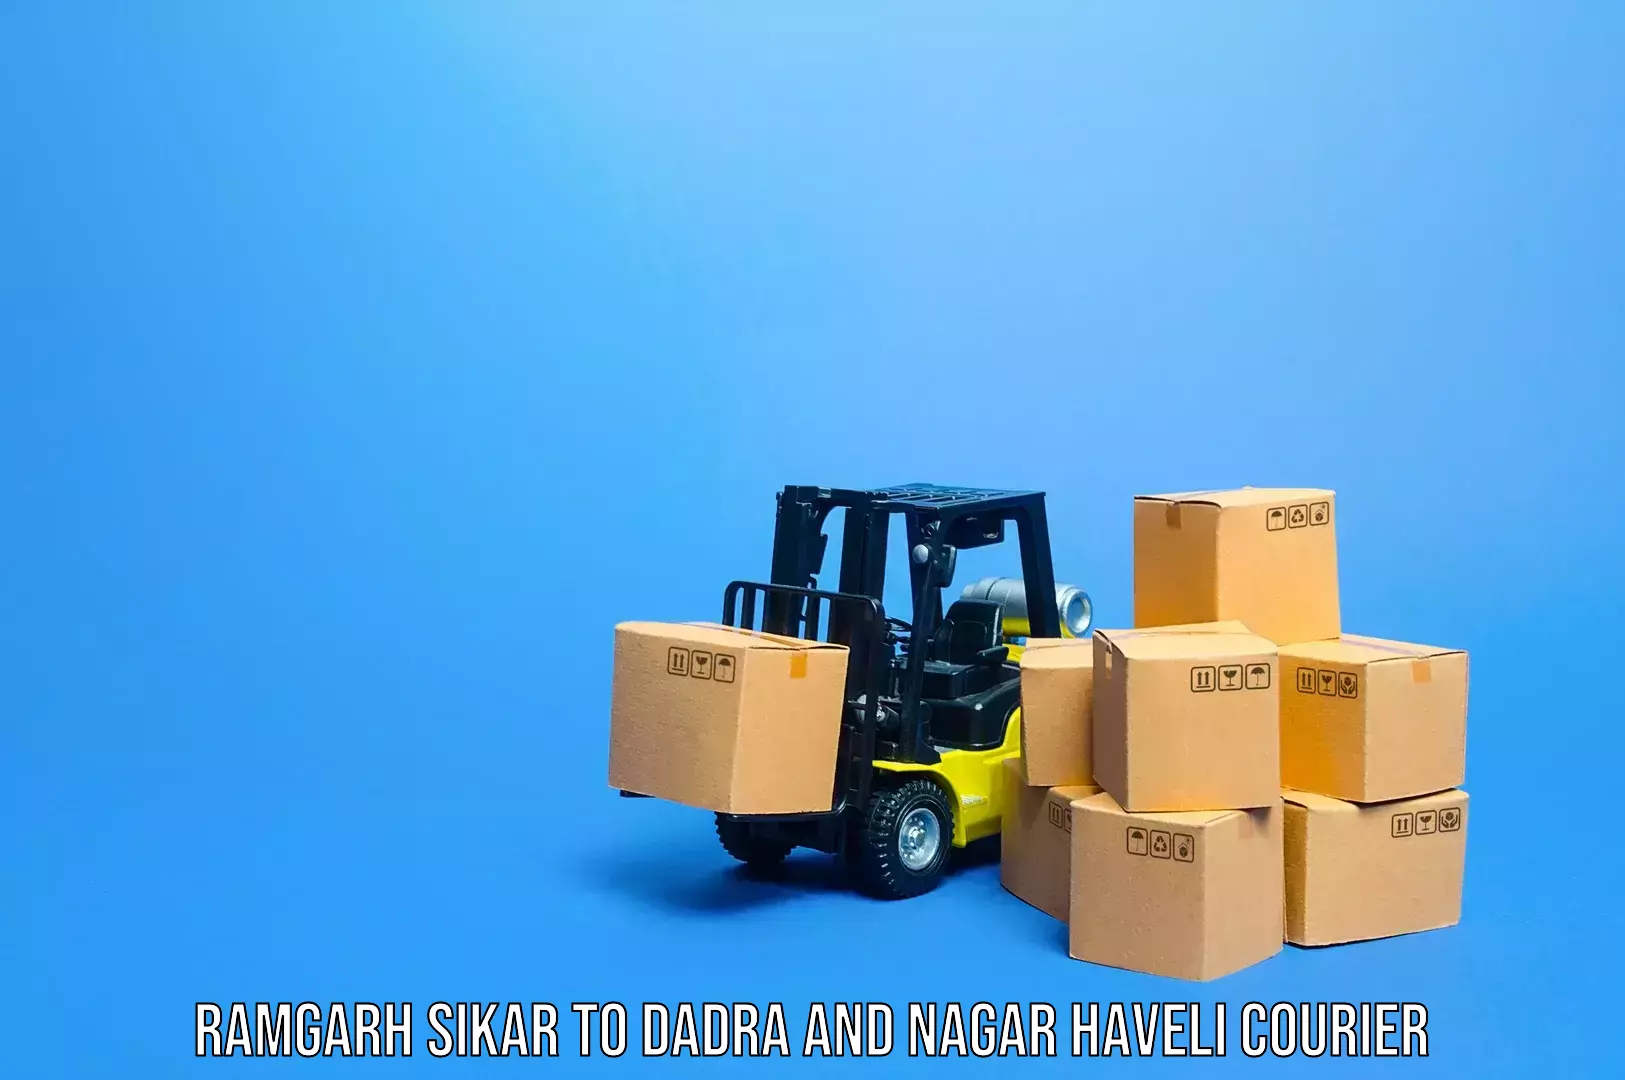 Luggage storage and delivery Ramgarh Sikar to Silvassa